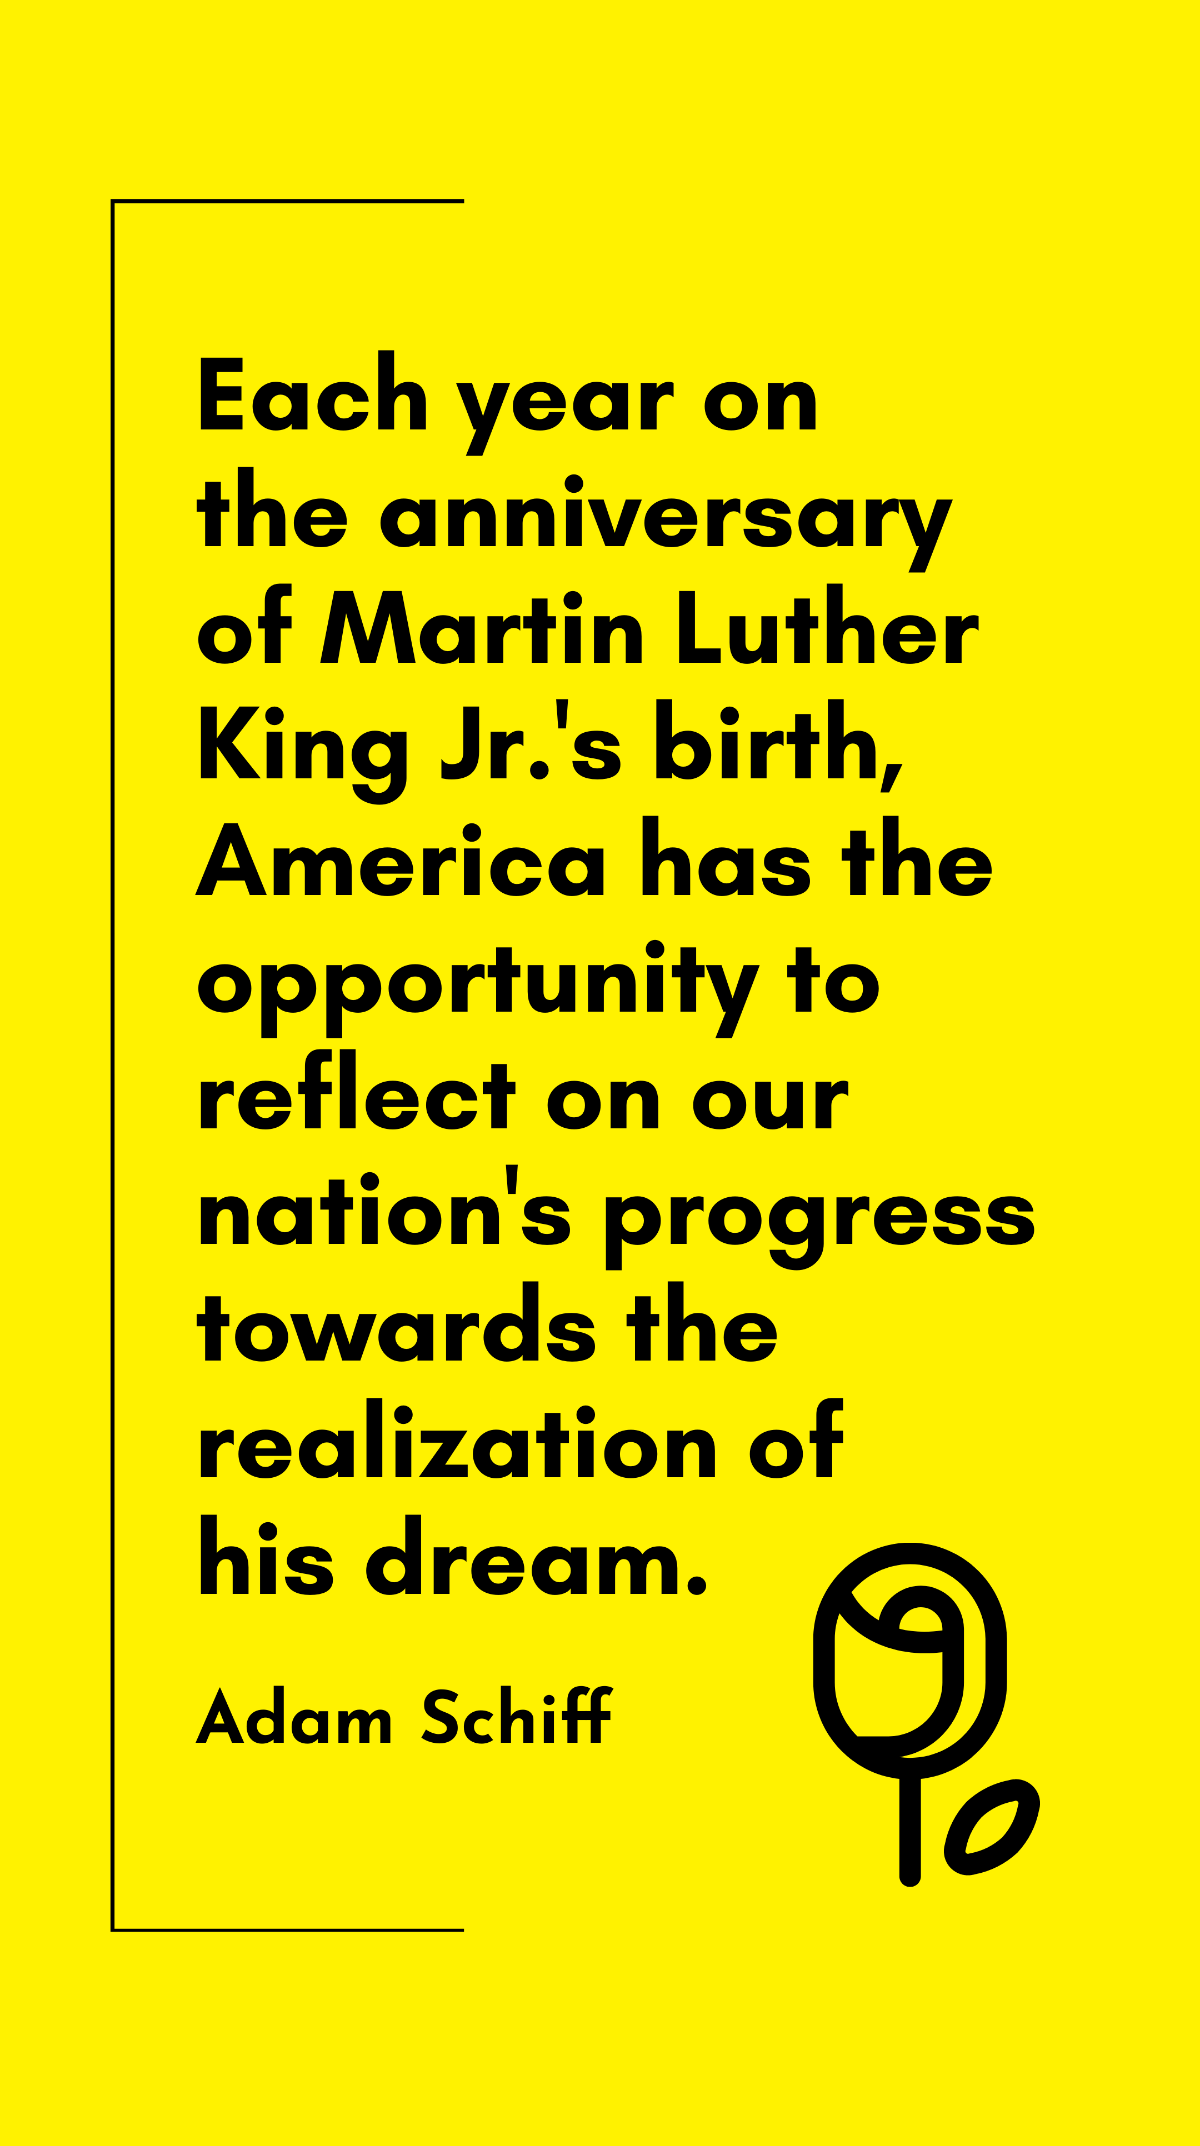 Free Adam Schiff - Each year on the anniversary of Martin Luther King Jr.'s birth, America has the opportunity to reflect on our nation's progress towards the realization of his dream. Template